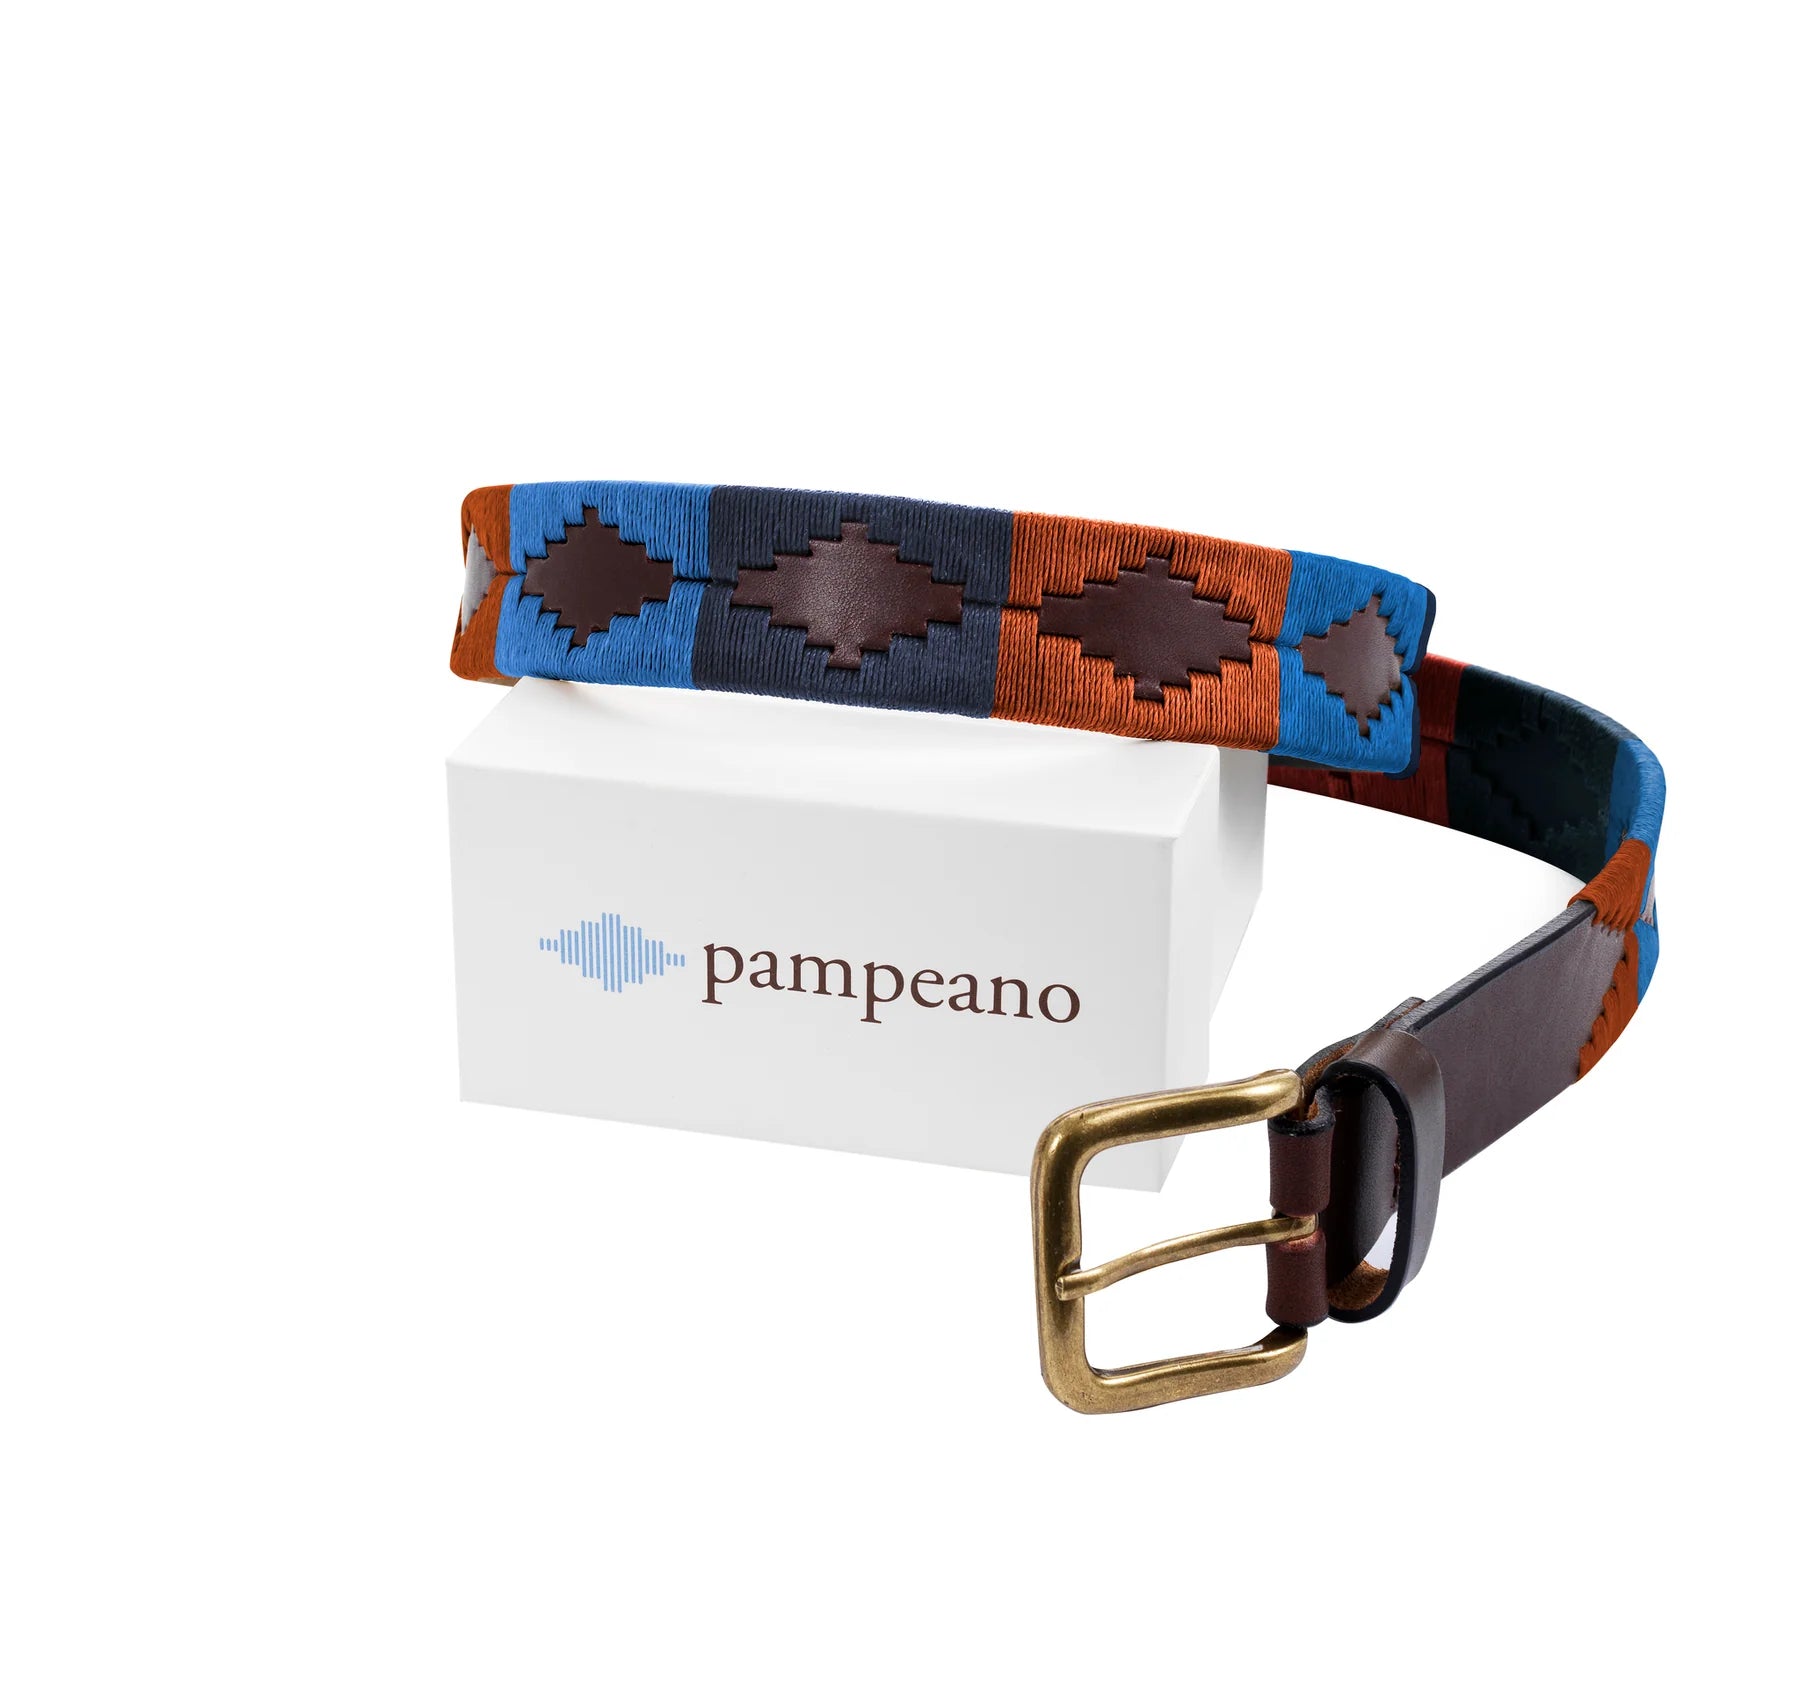 Pampeano Polo Leather Belt The Lumbre in orange, sky blue and navy blue